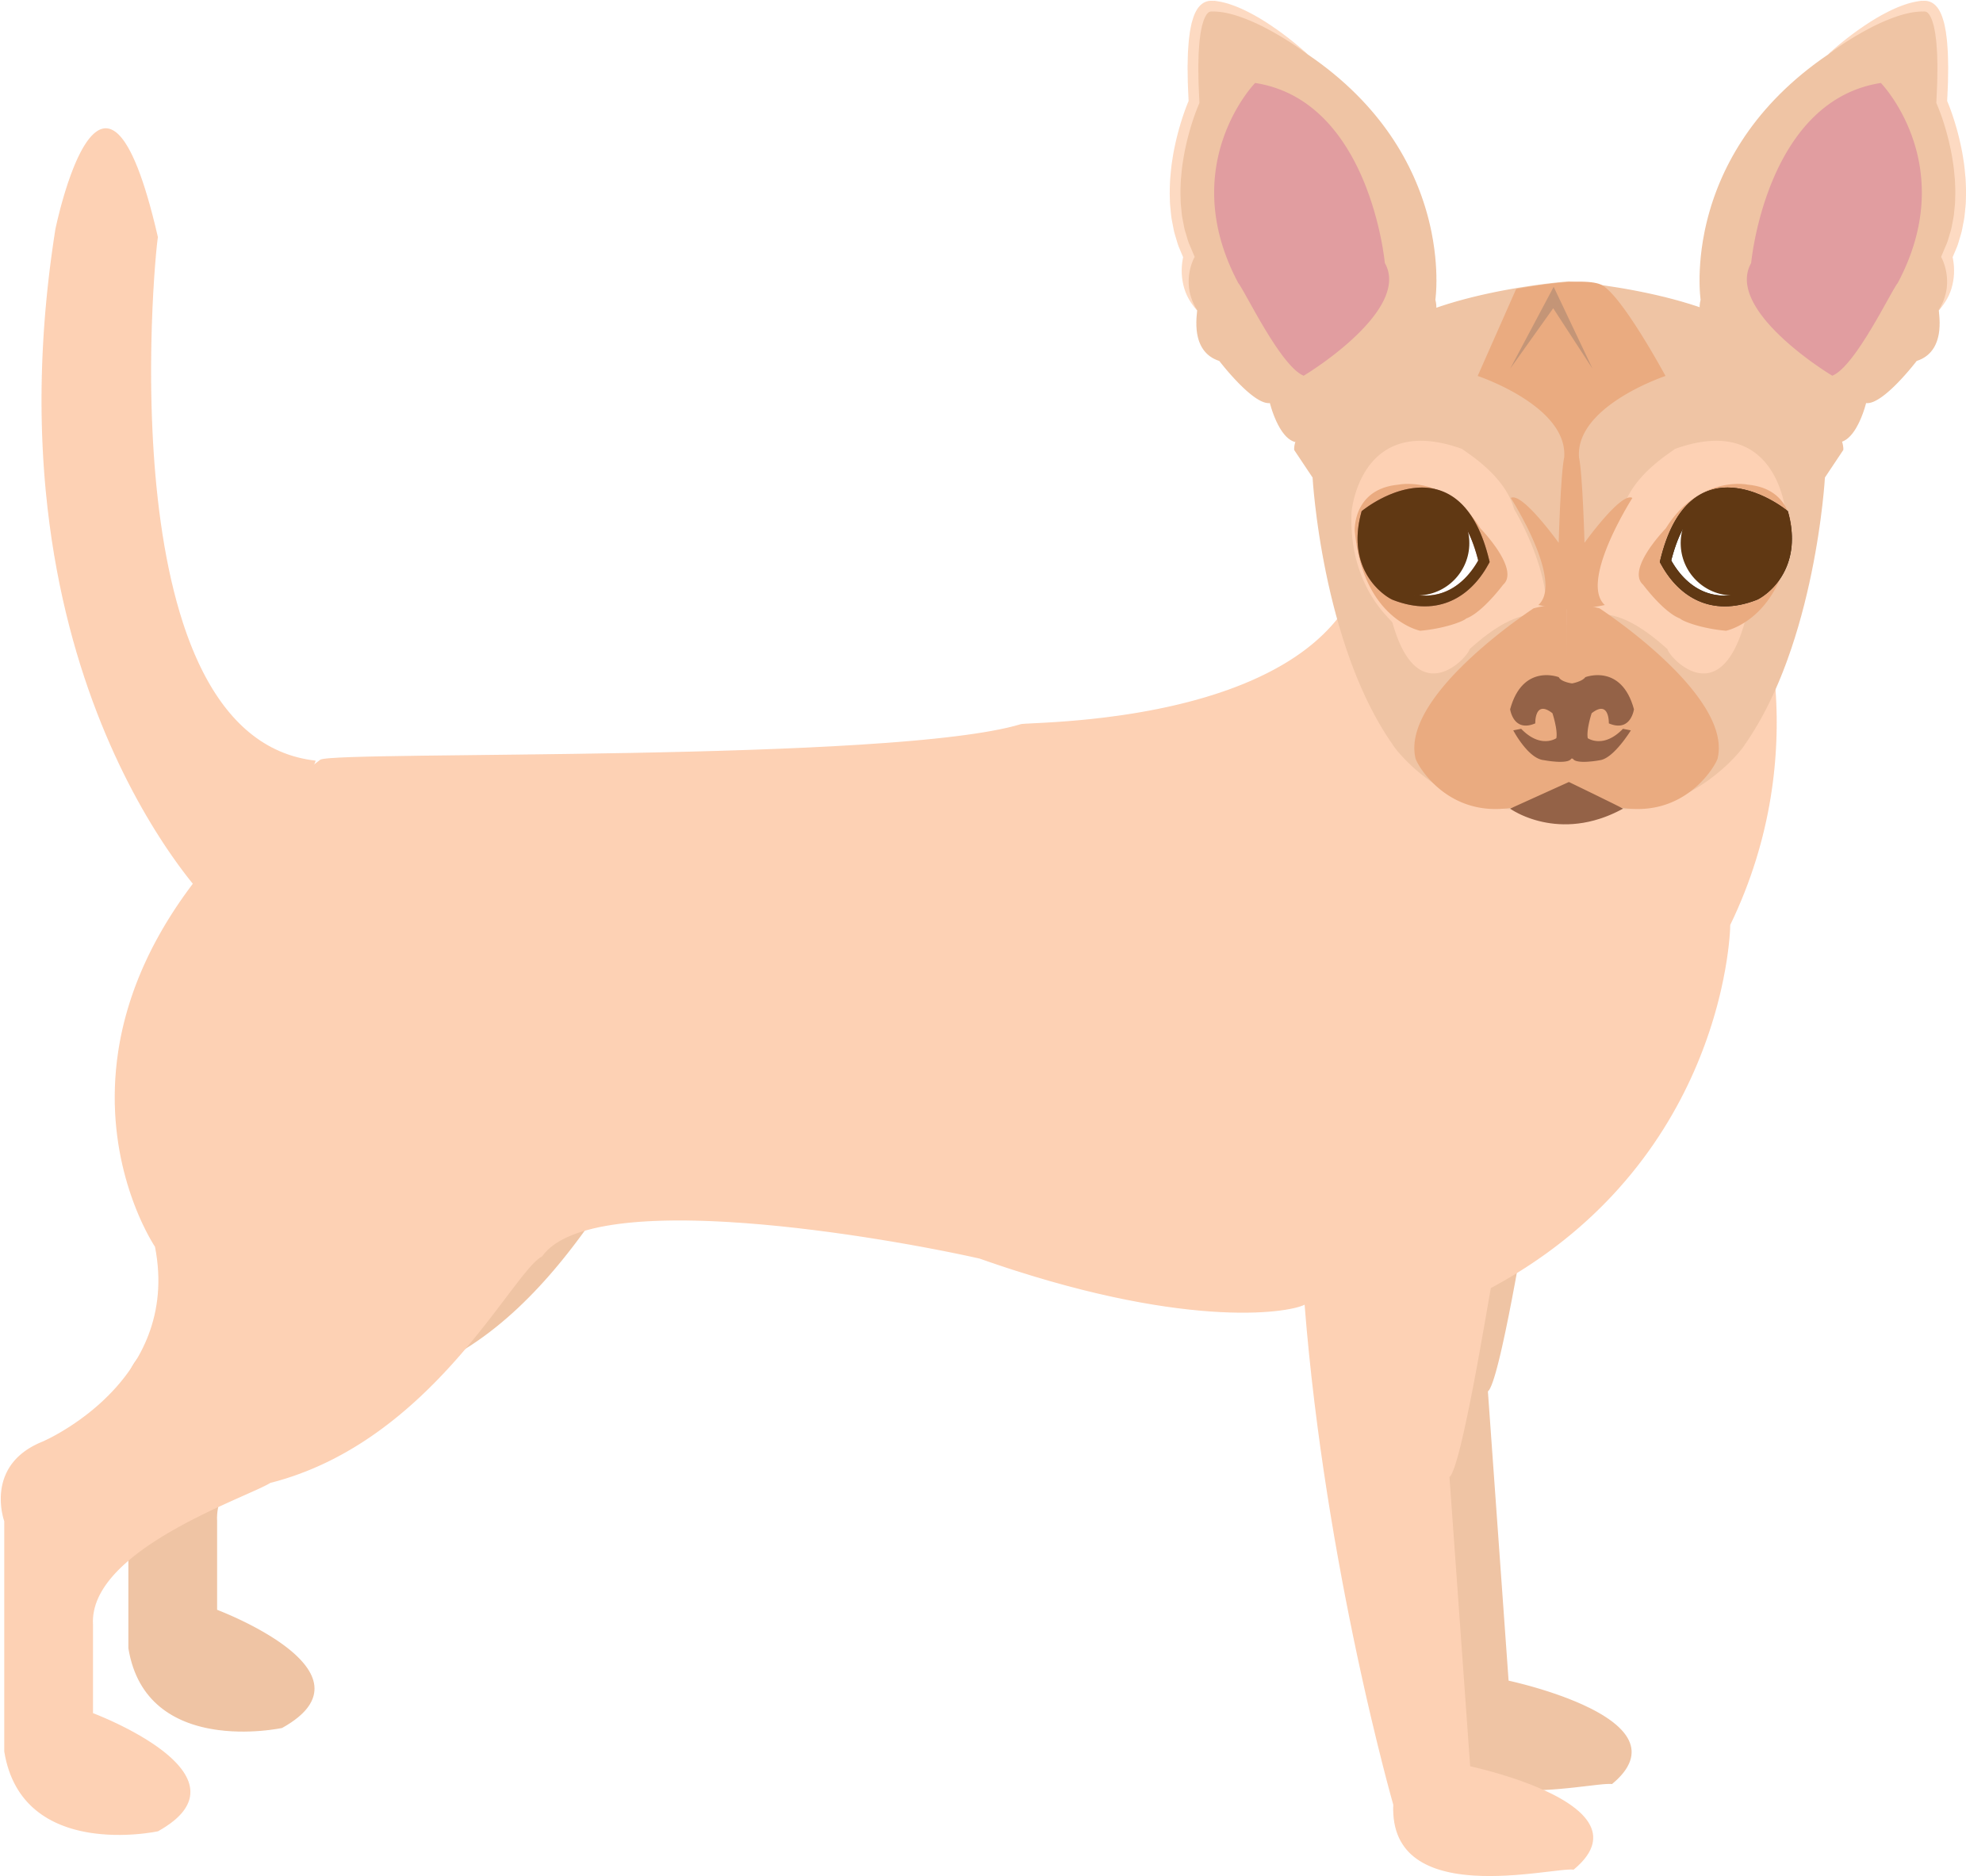 A Dog With Long Ears And A Black Background